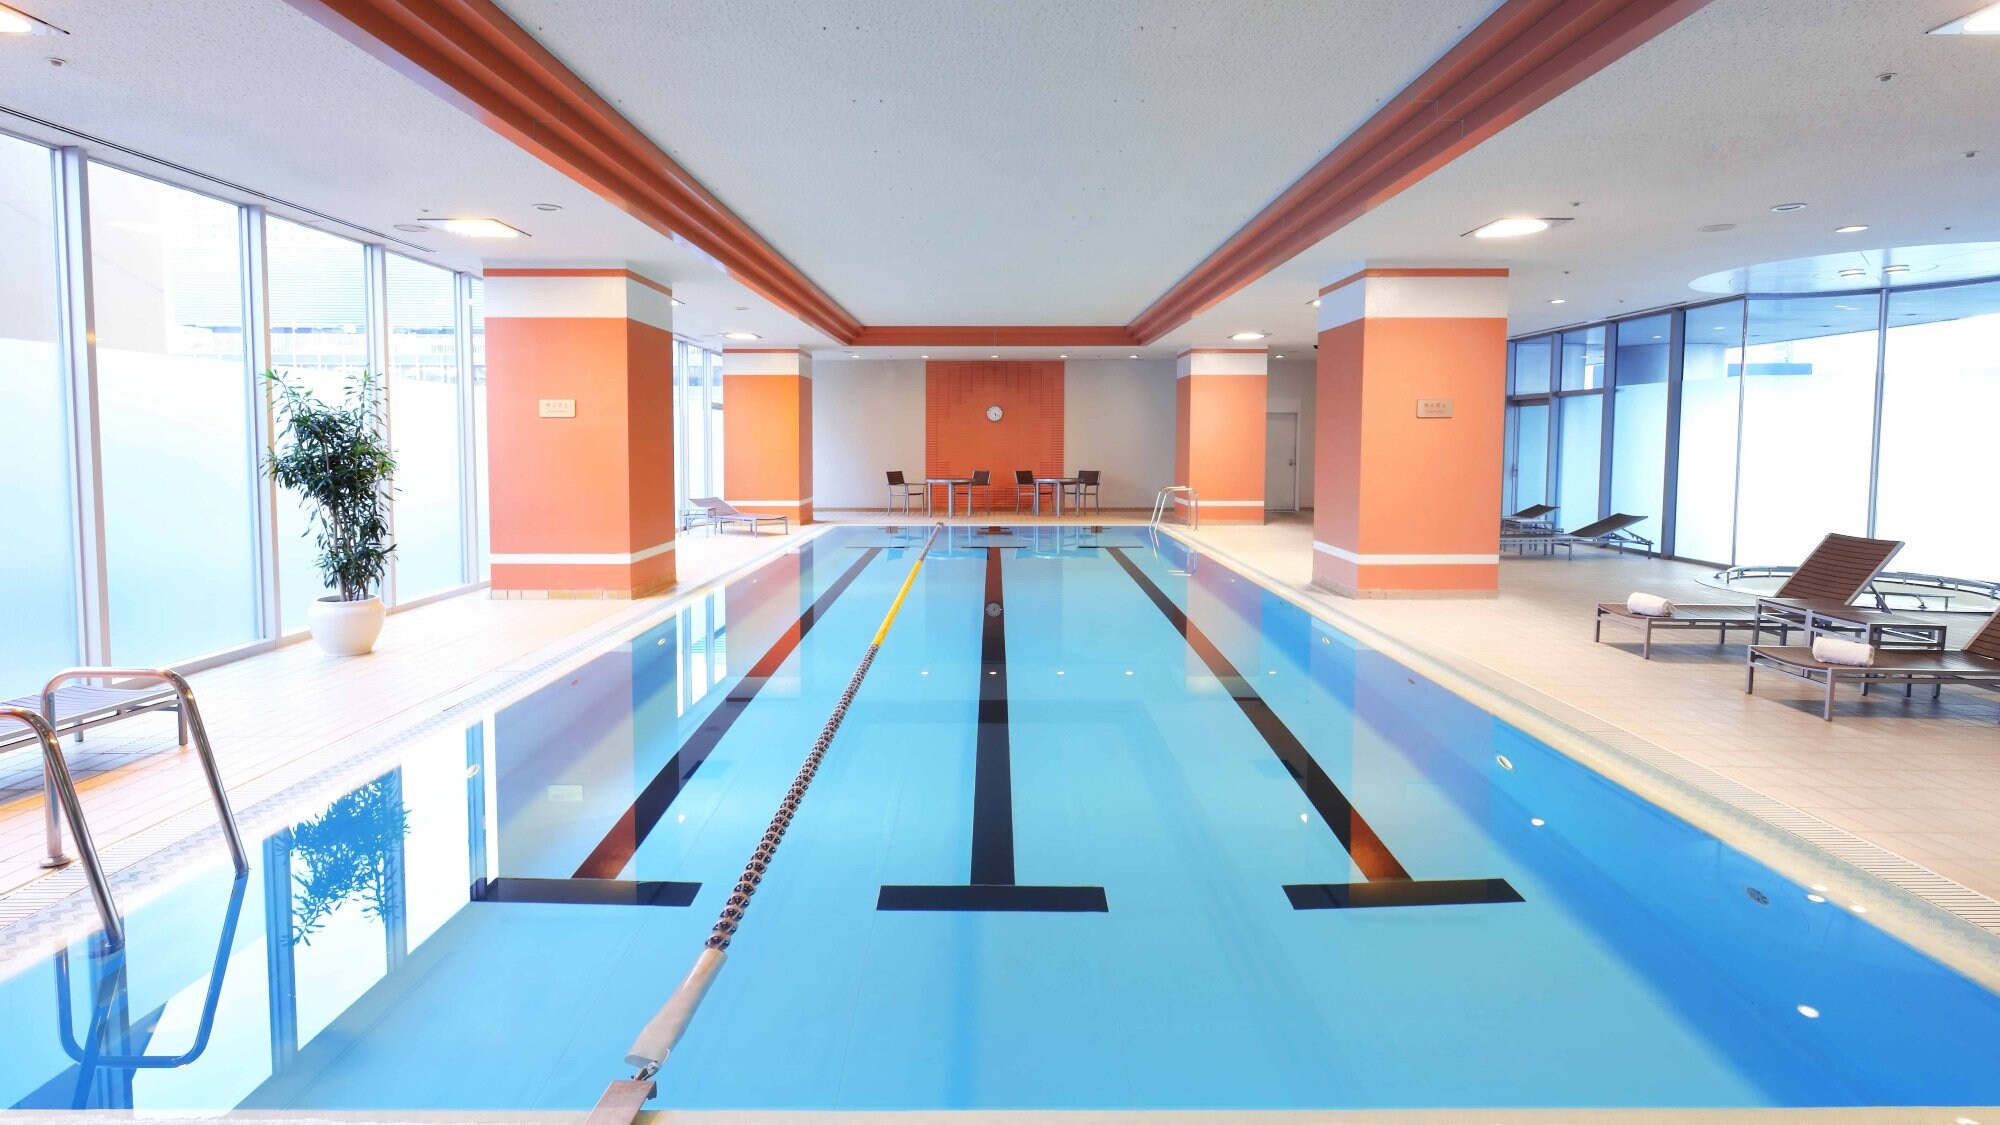 Indoor heated pool (15m) that can be used throughout the year